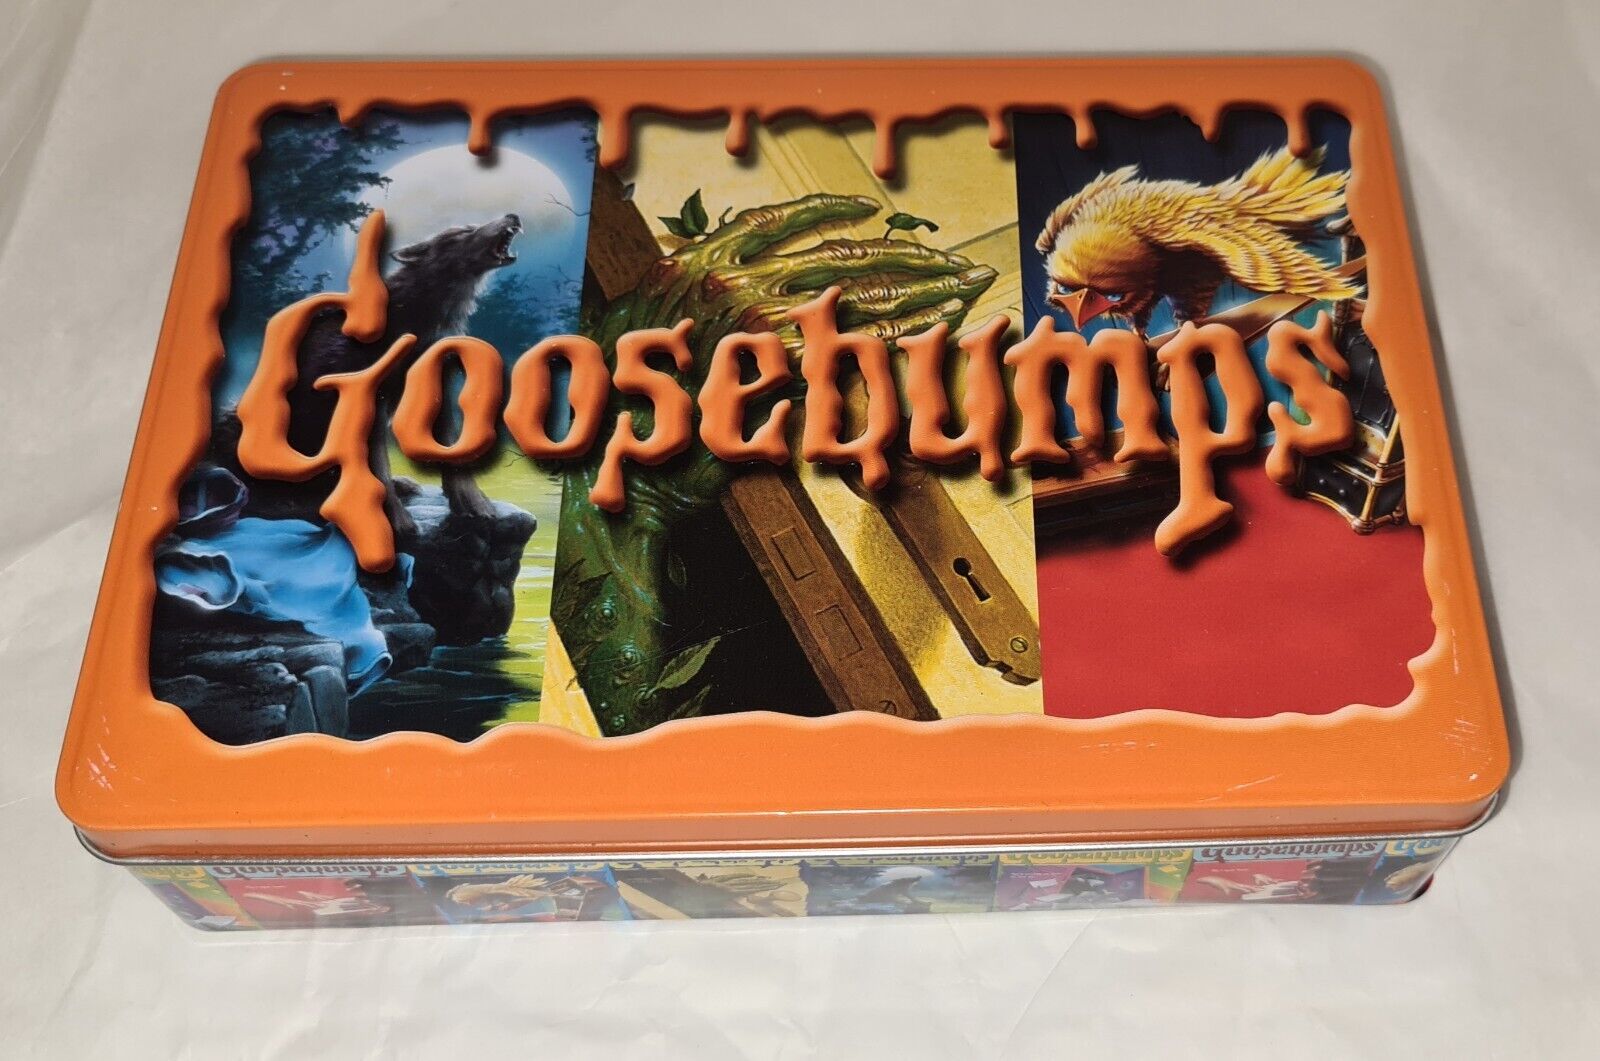 Goosebumps Vintage Style Metal Tin In Great Pre-Owned Condition